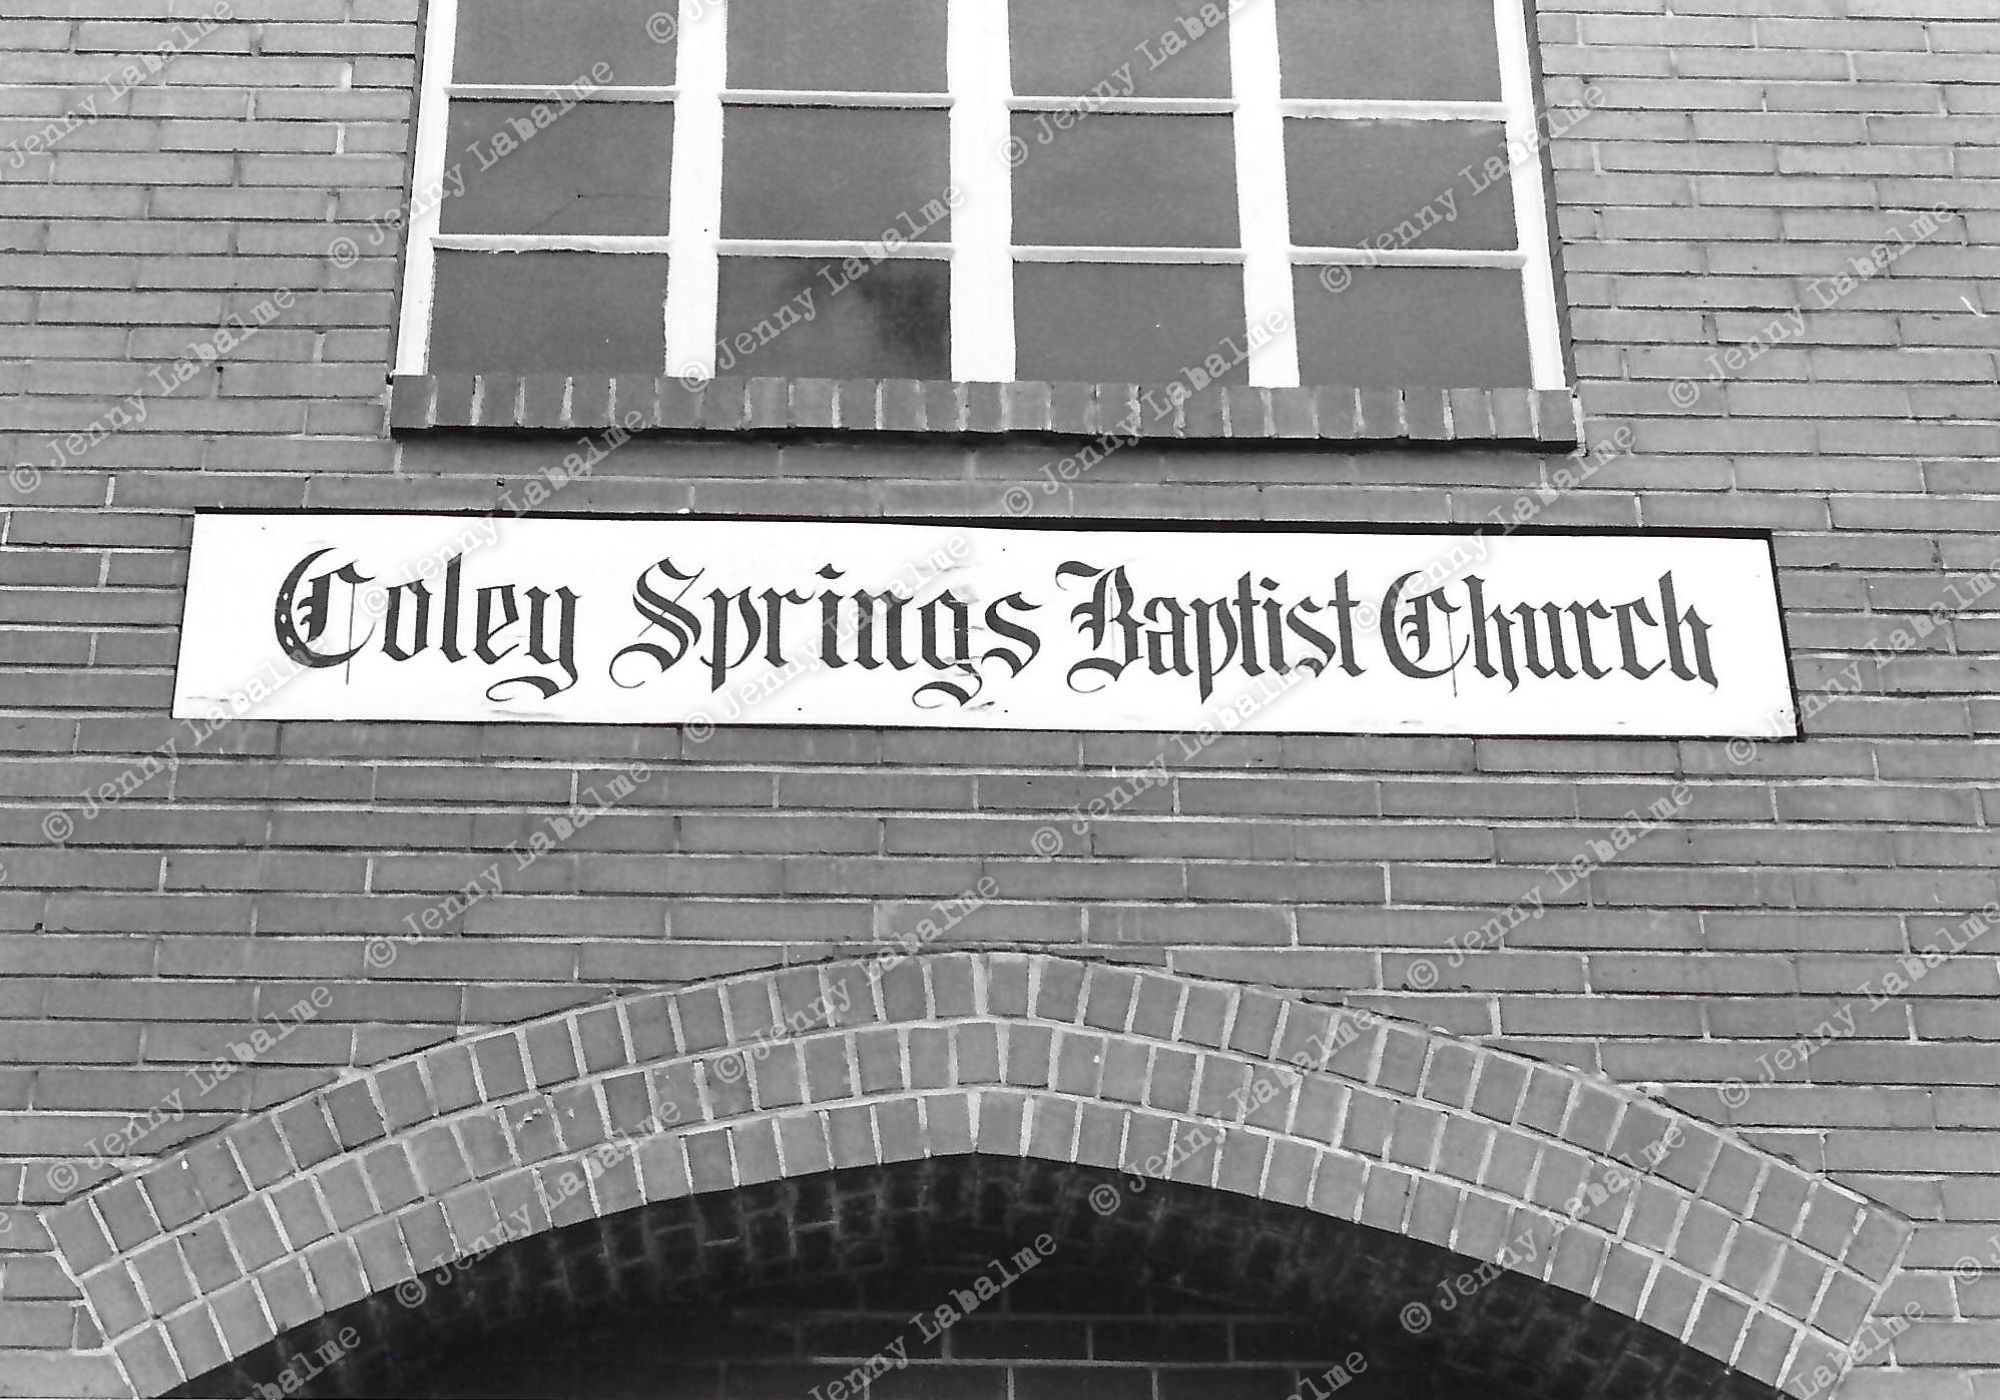 Coley Springs Baptist Church was a gathering spot for the PCB protests